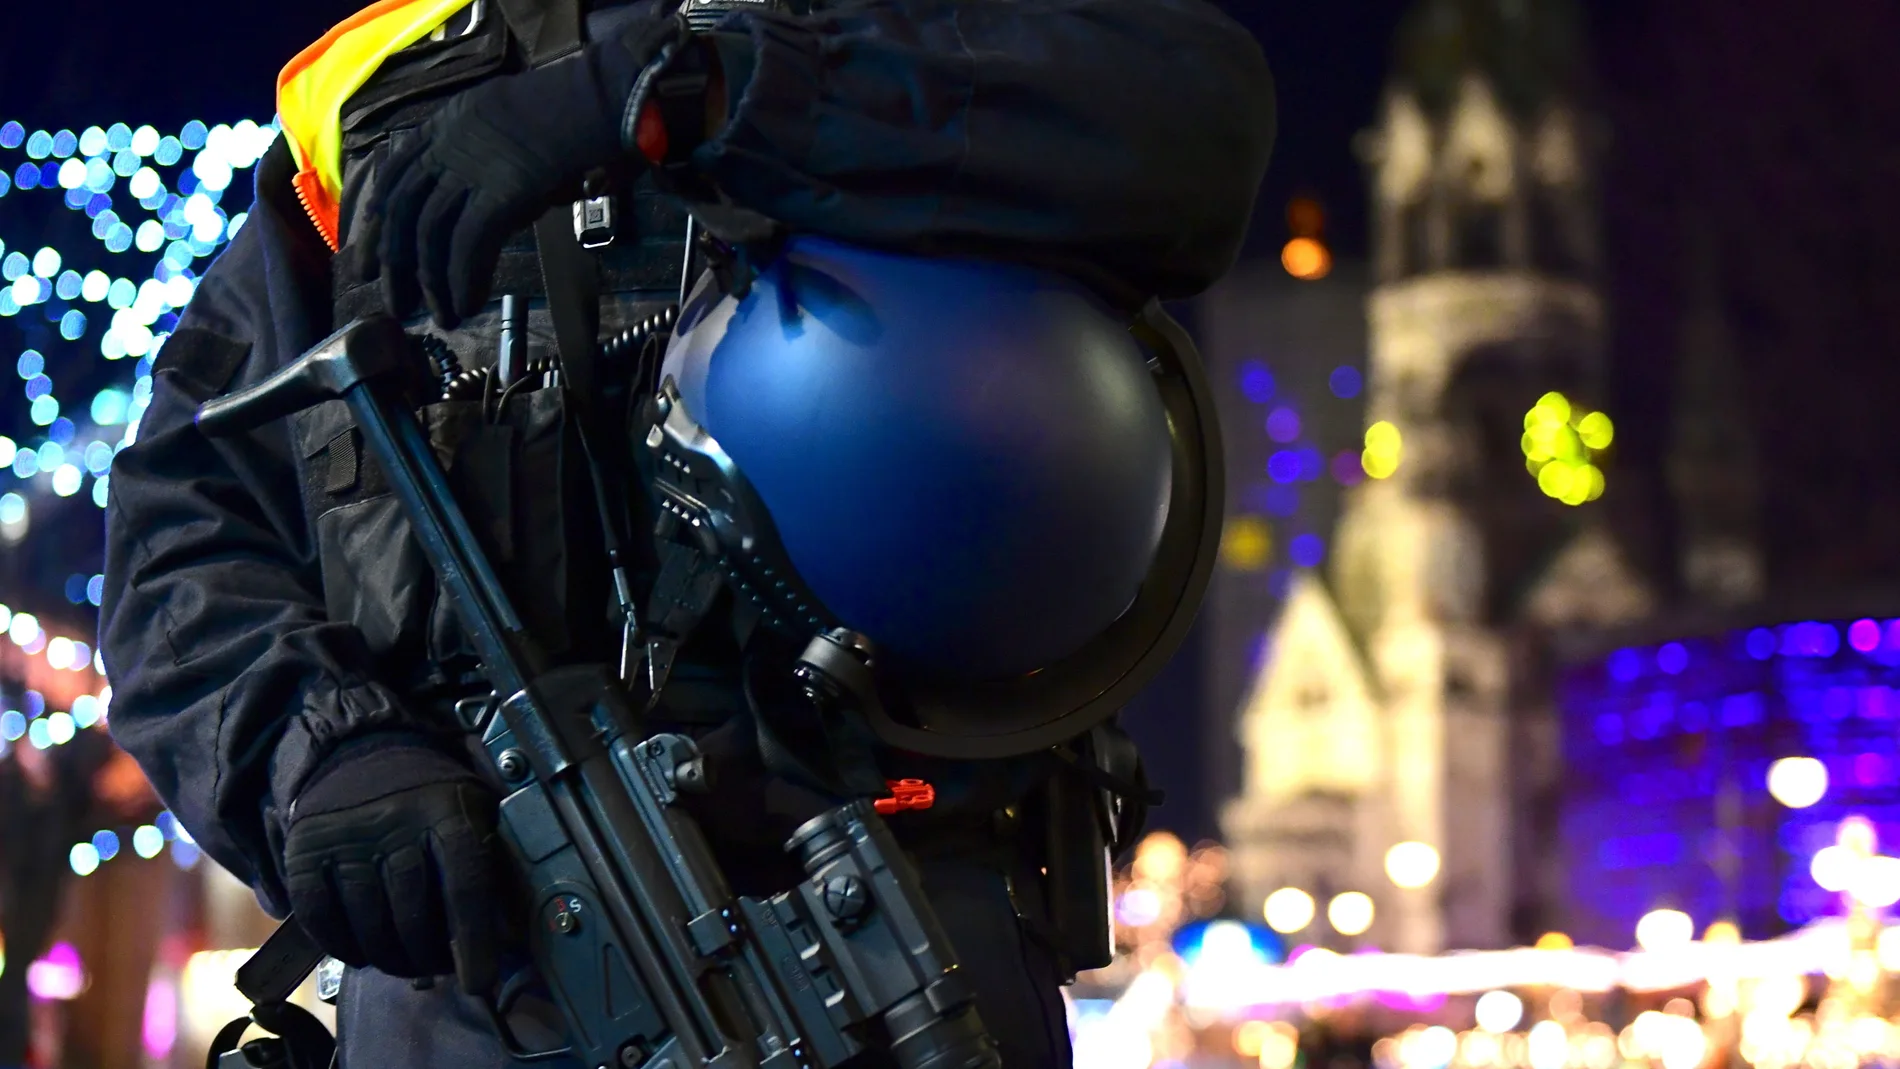 Berlin Christmas market evacuated due to suspicious object